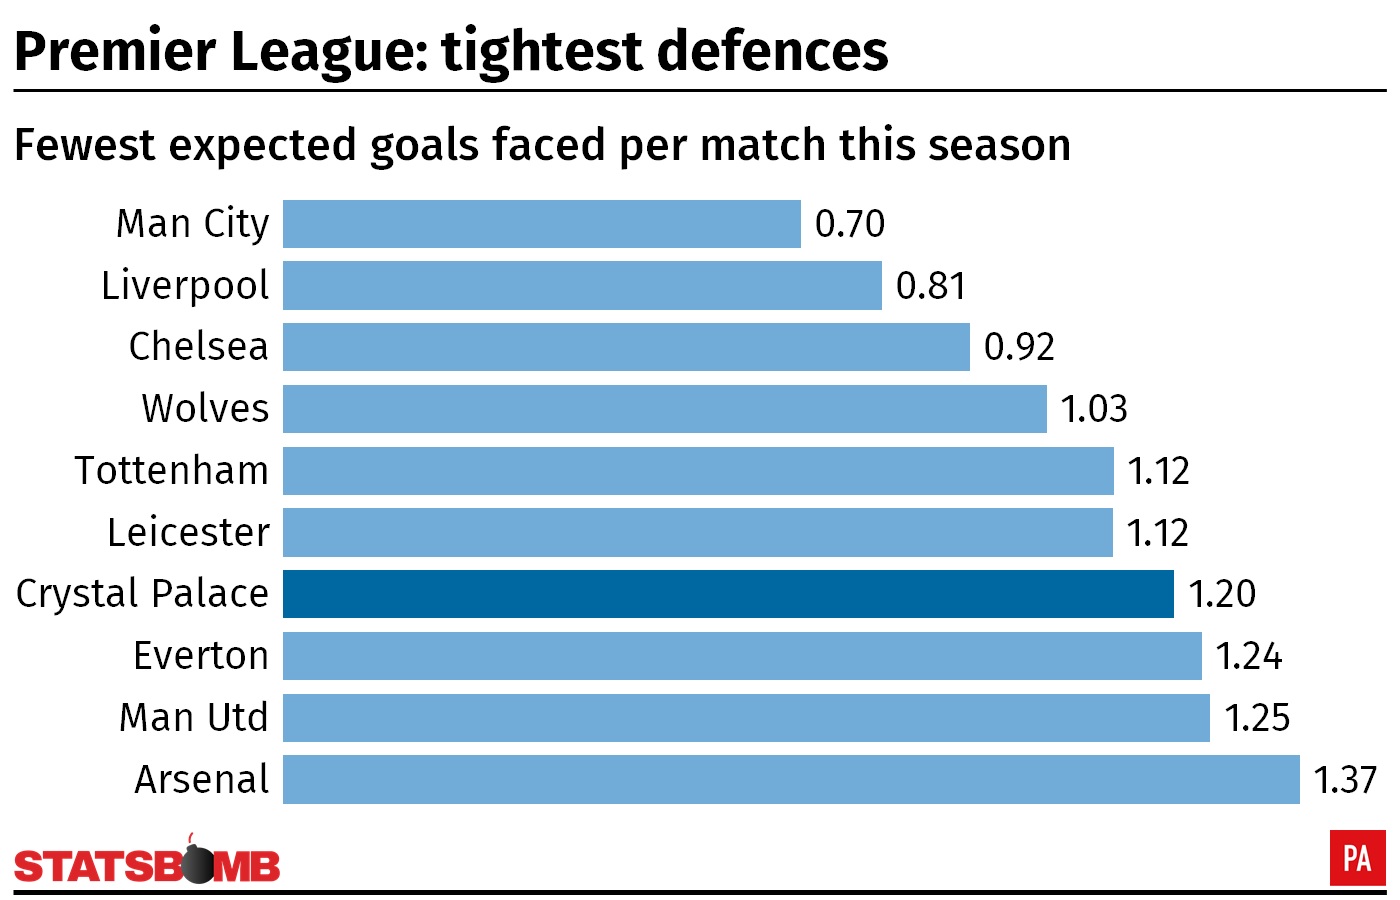 A graphic showing the expected goals faced per match for Premier League teams in the 2018/19 season